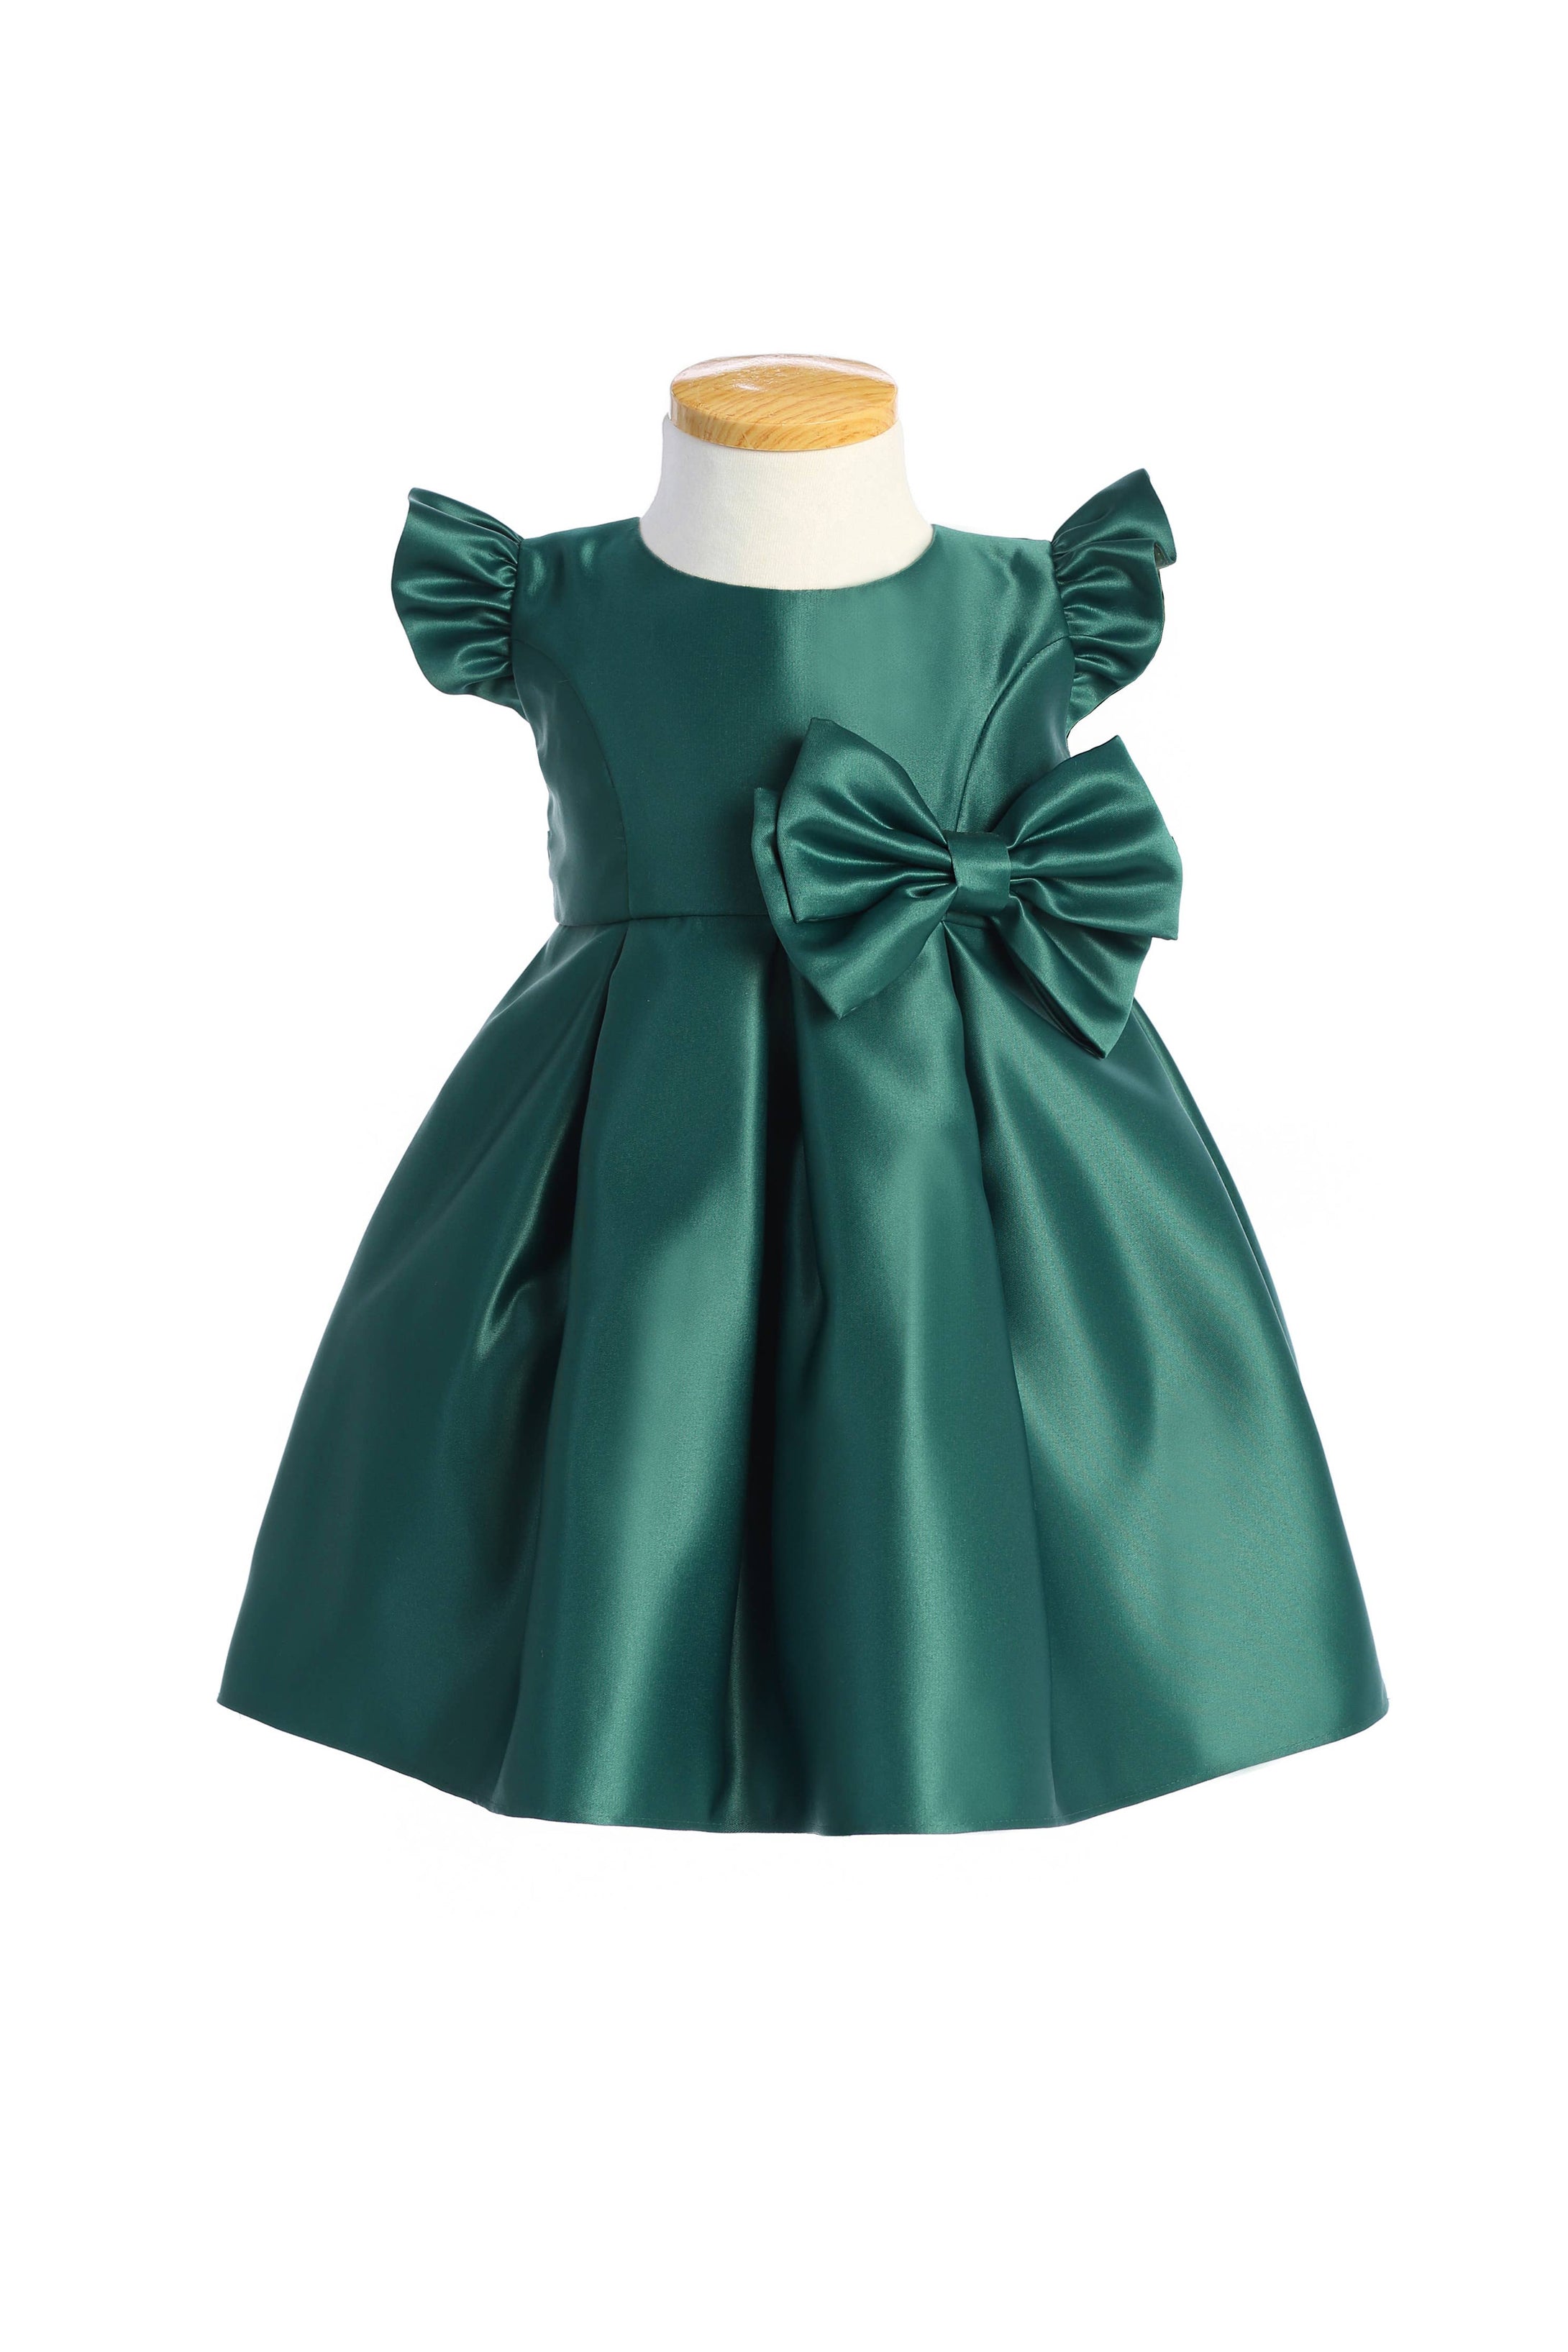 SK930 - satin pleated flutter sleeve with bow detail